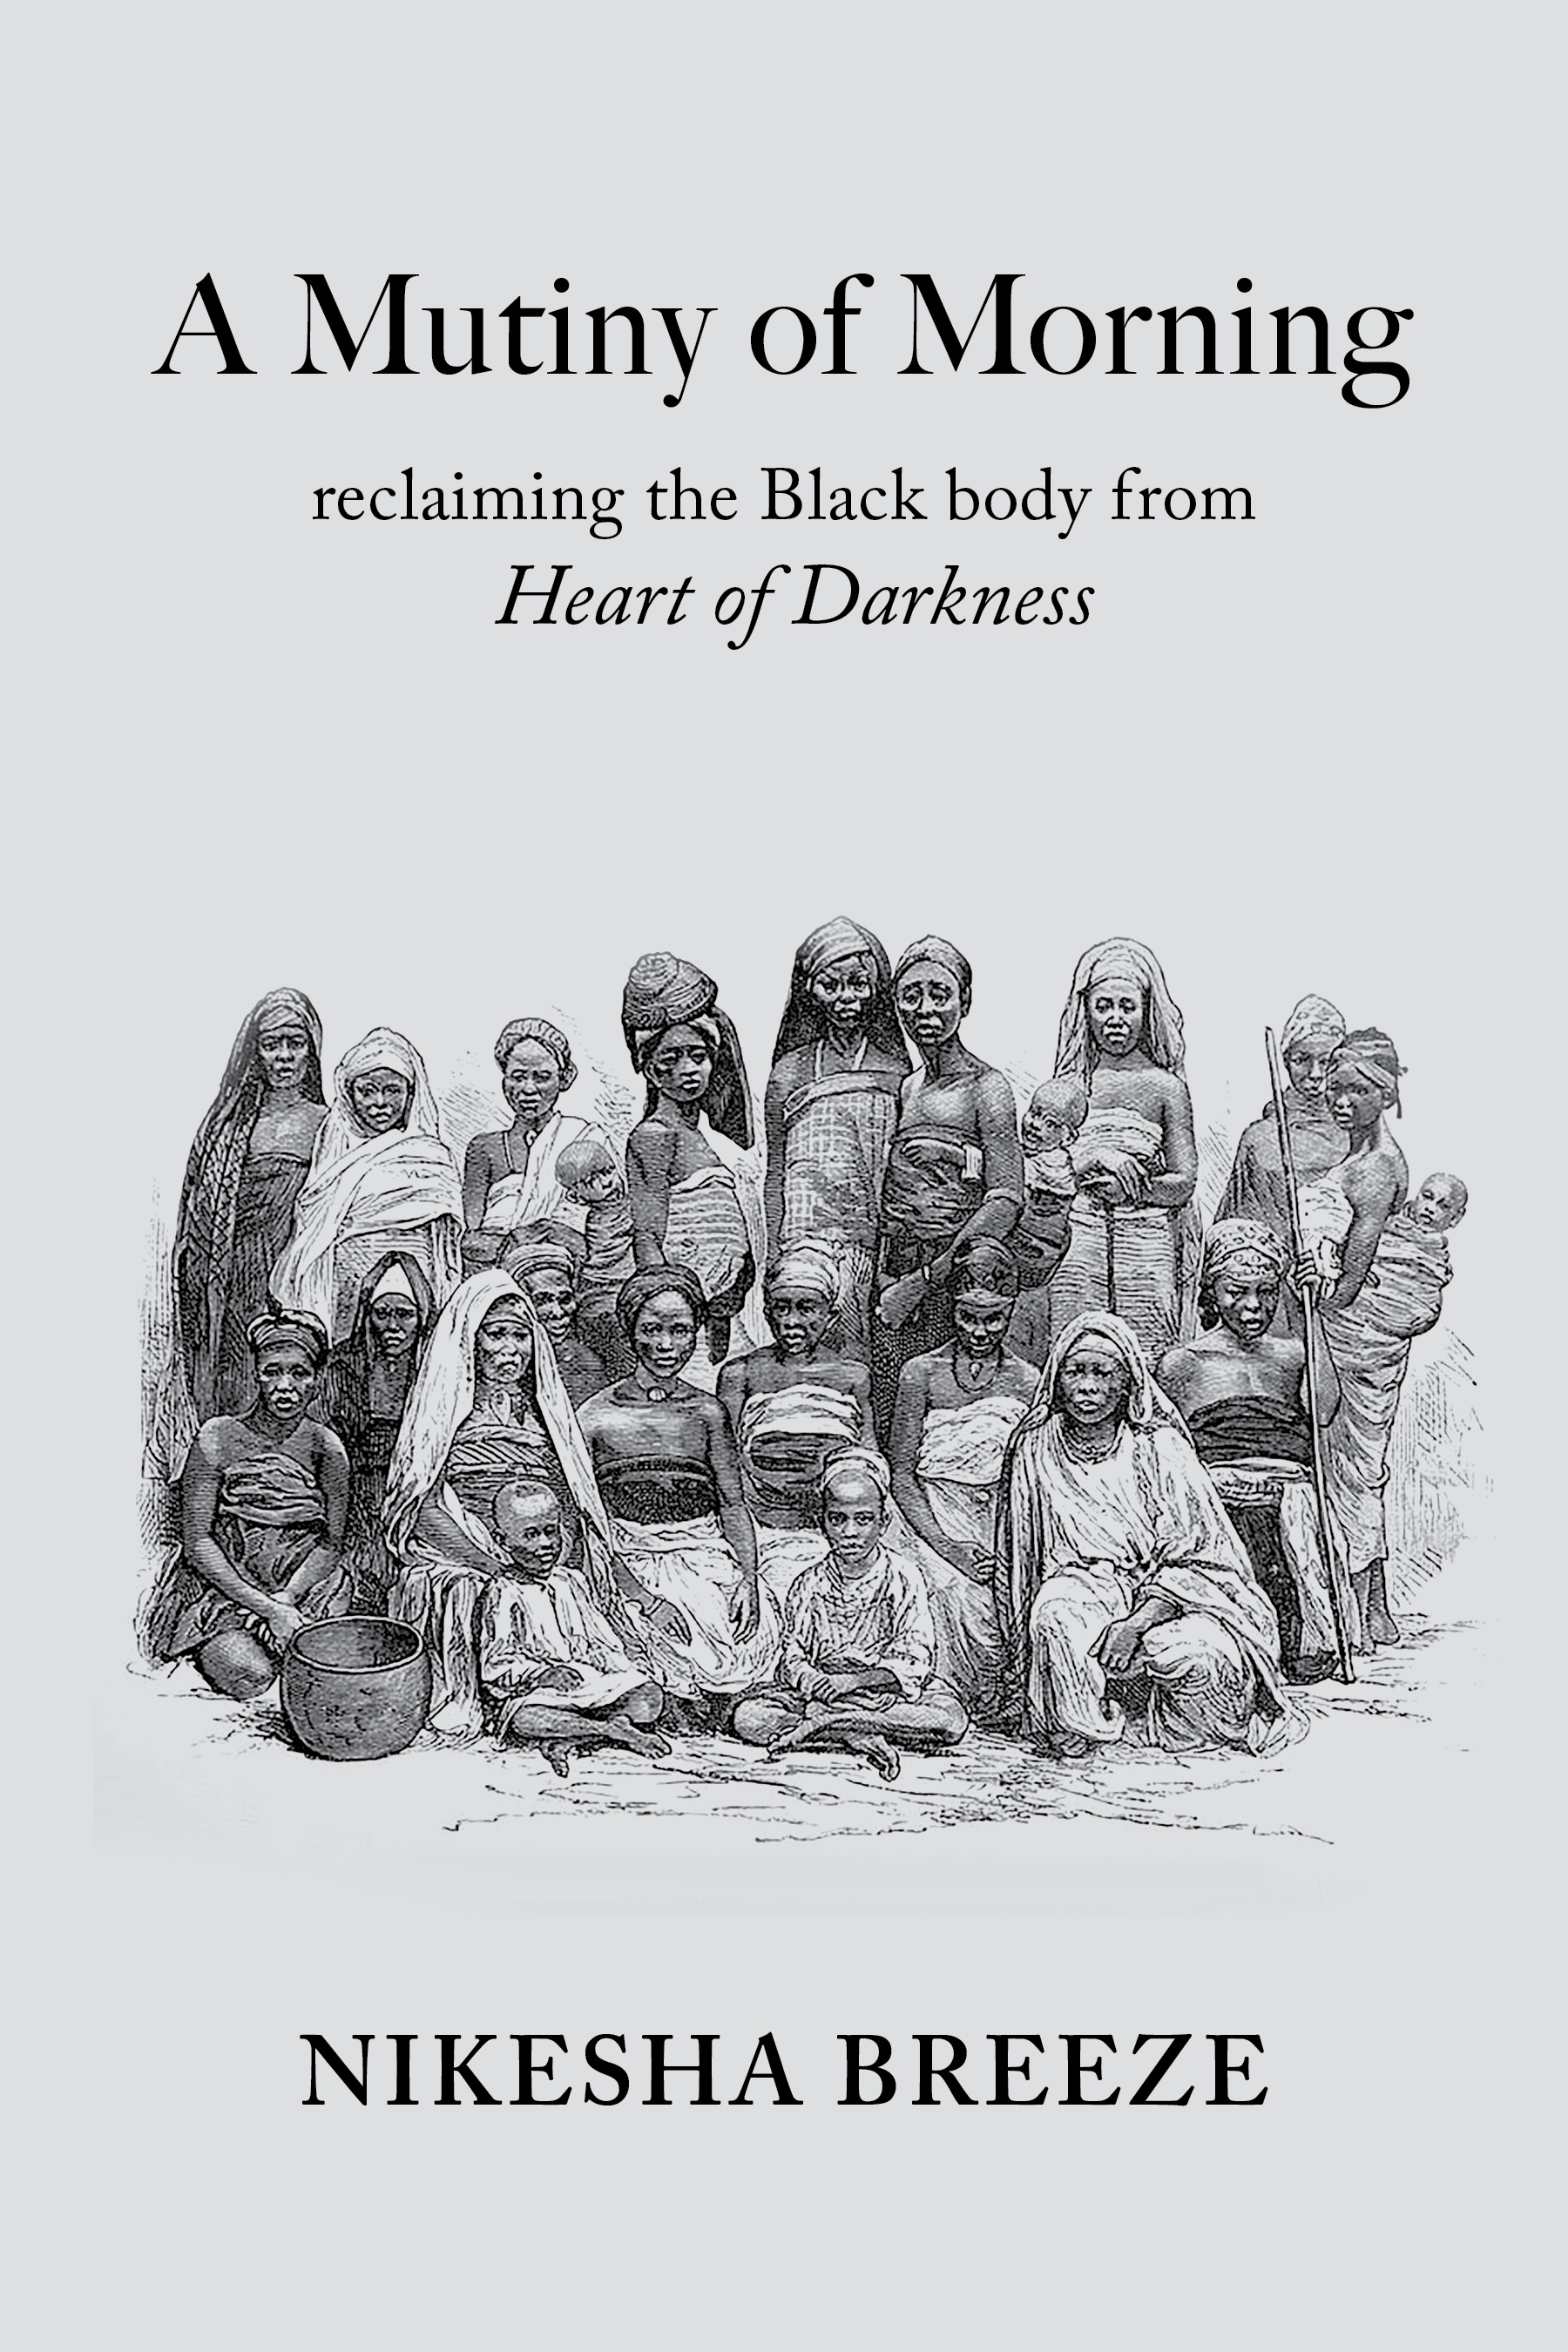 A Mutiny of Morning: Reclaiming the Black Body from Heart of Darkness